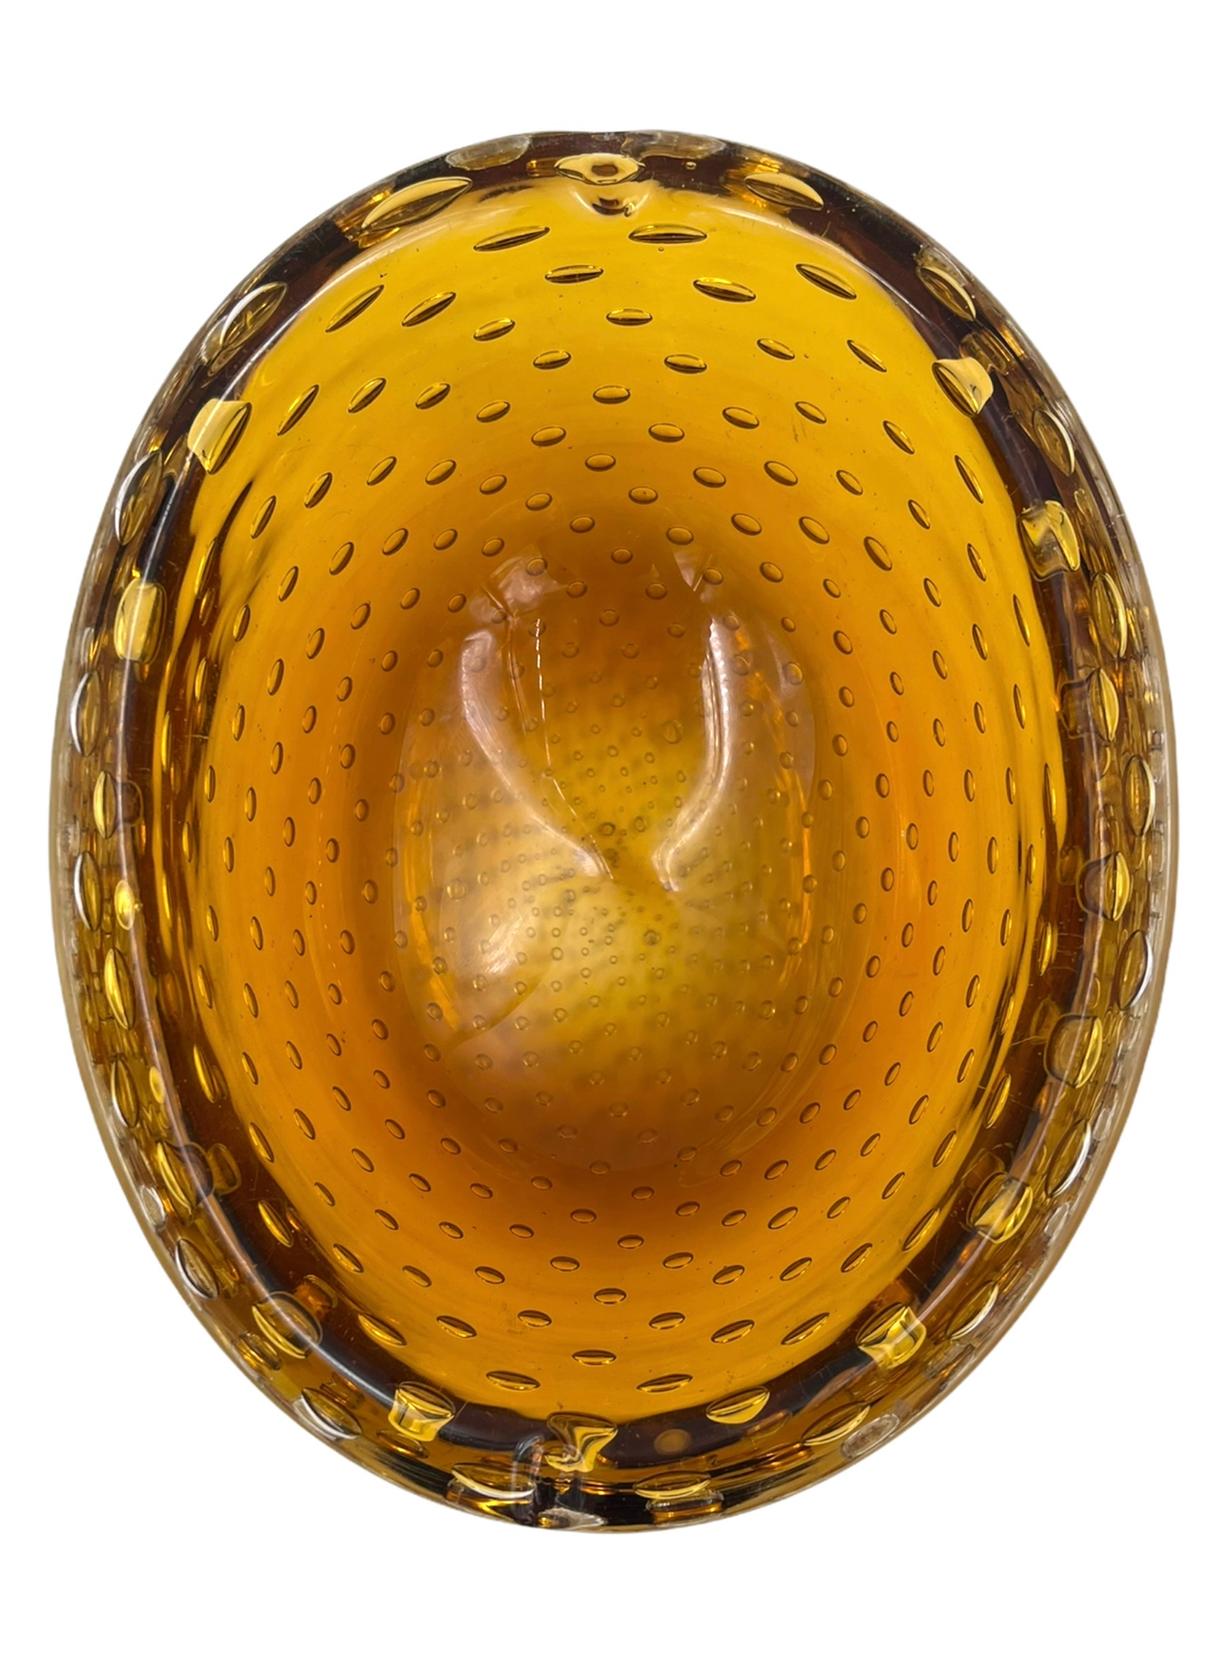 Hand-Crafted Mid-Century Modern Murano Art Glass Bowl in Amber Controlled Bubble, Italy 1970s For Sale